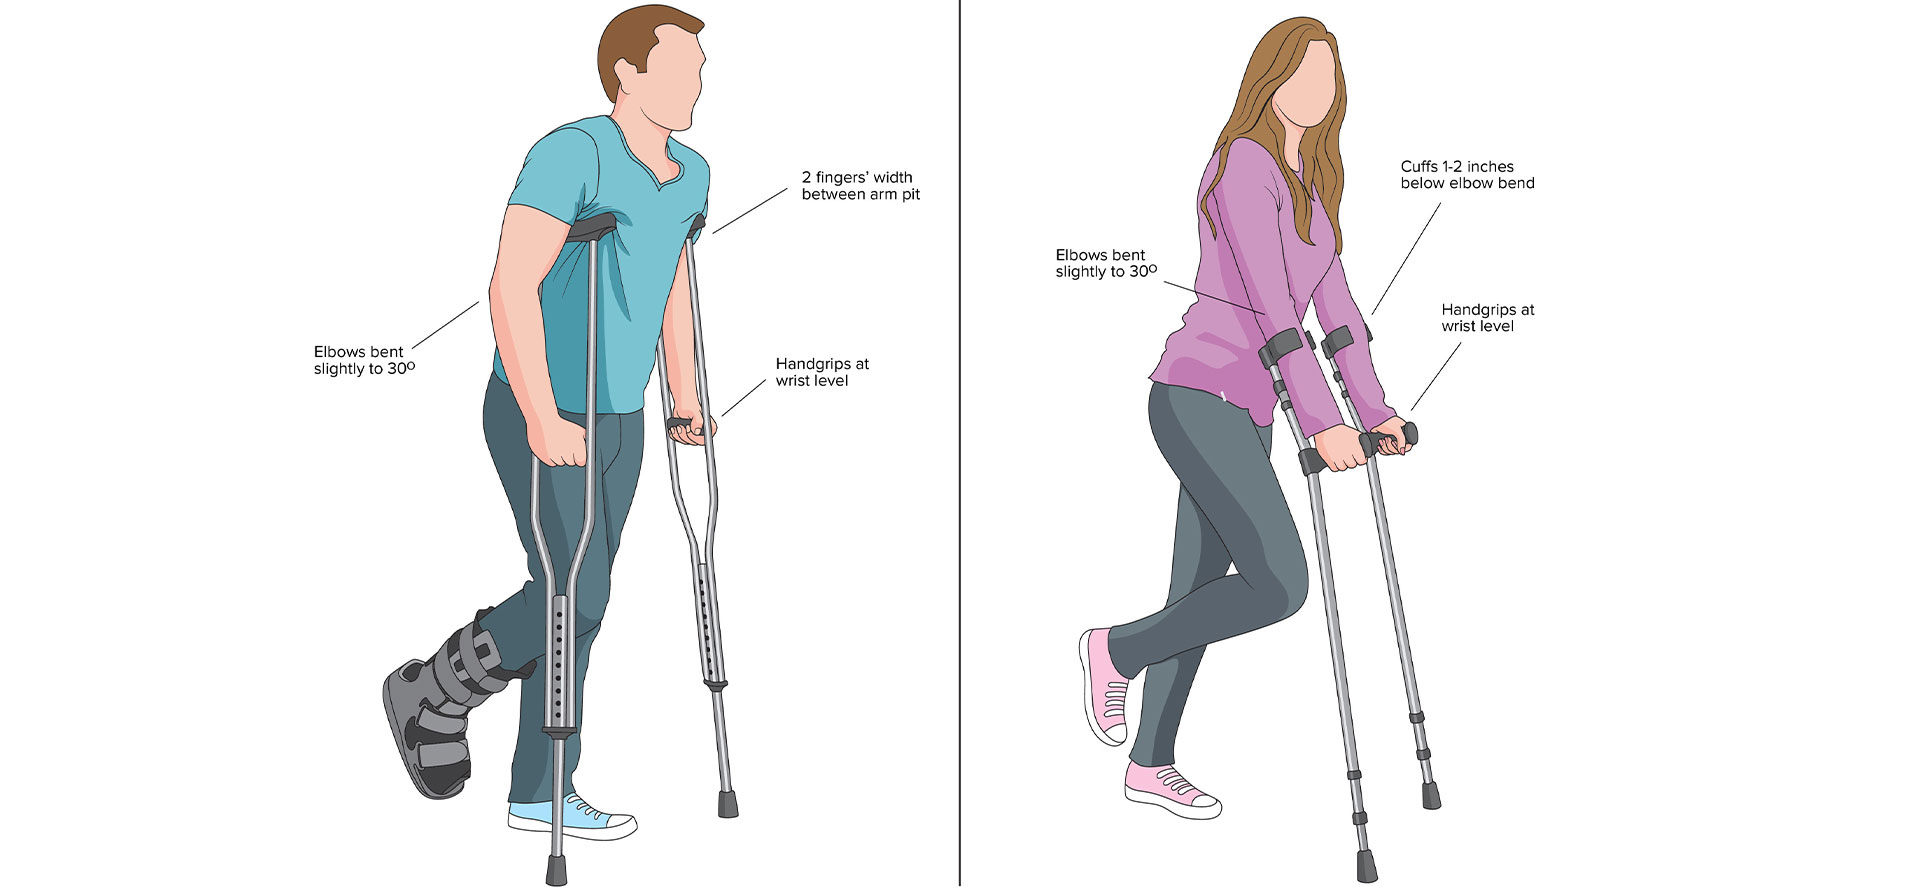 How To Use Your Crutches Appropriately